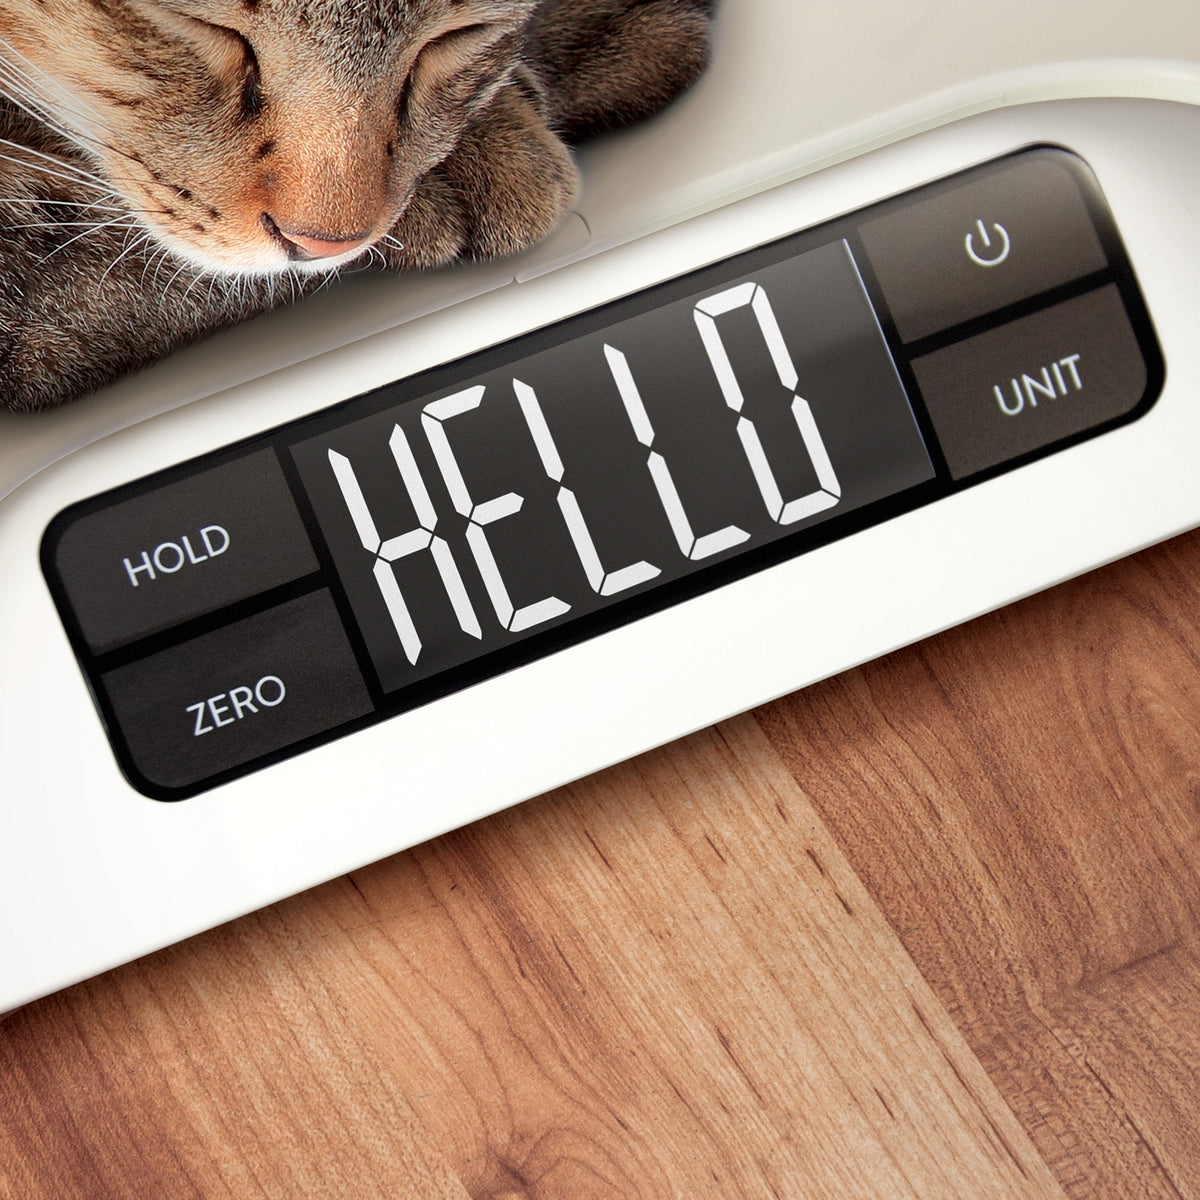 Pet Scale - Greater Goods